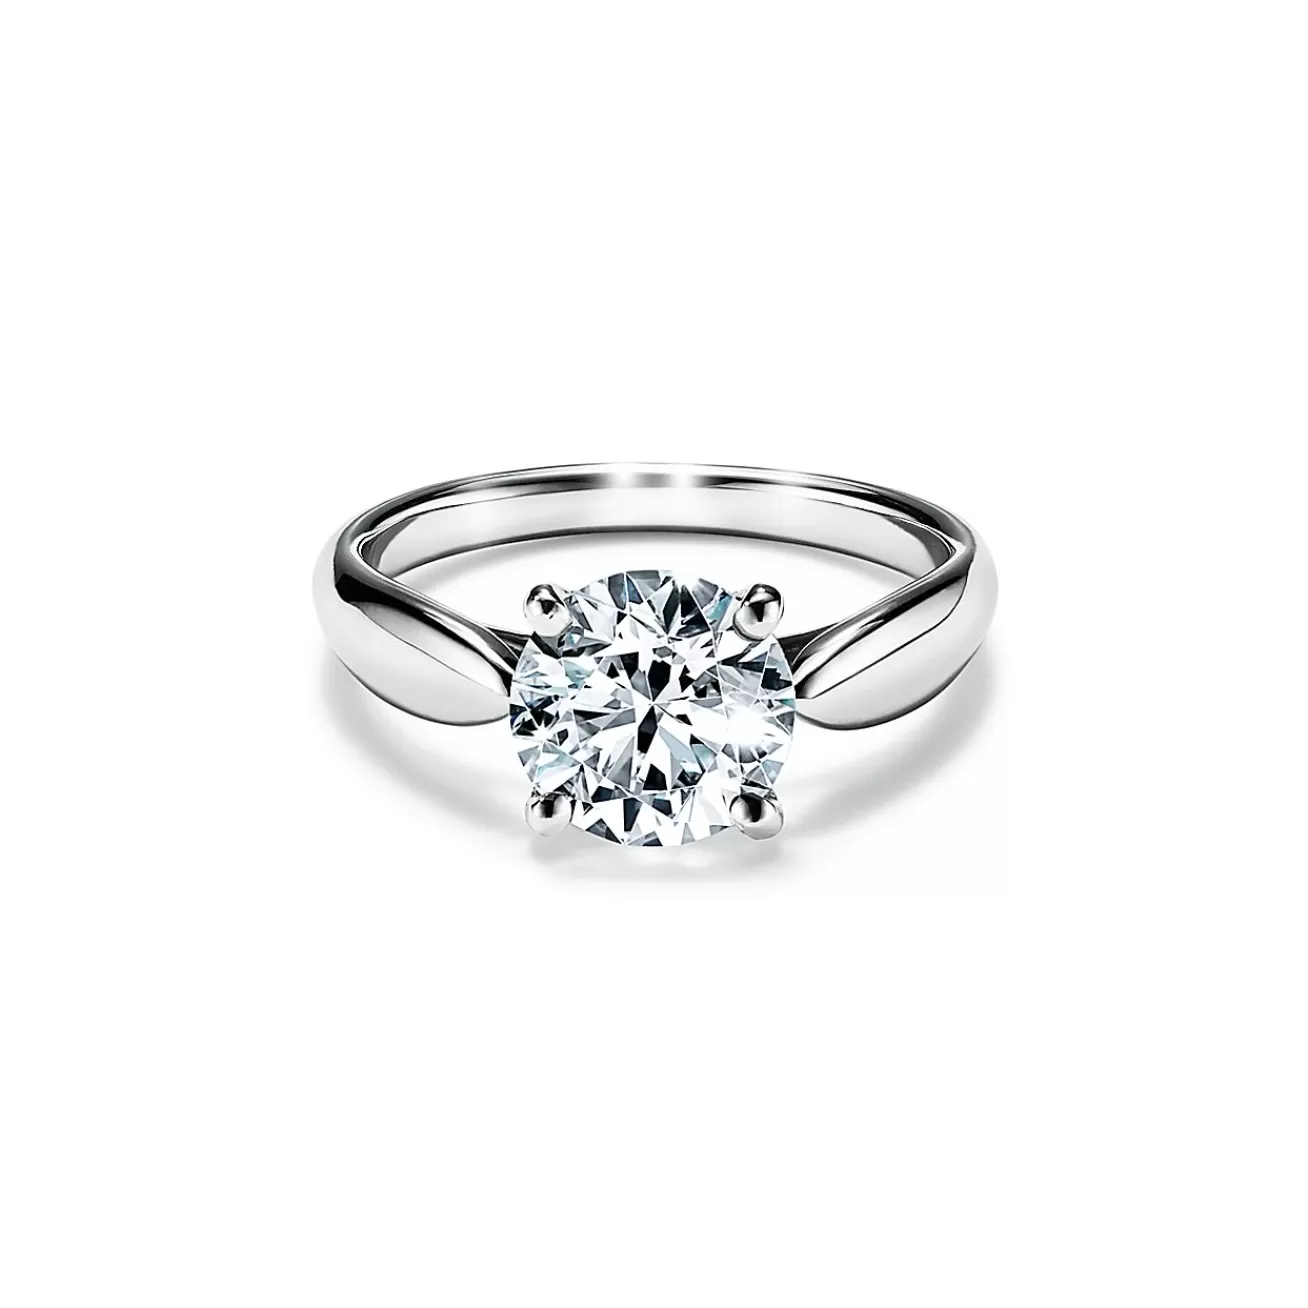 Tiffany & Co. Tiffany Harmony® engagement ring in platinum: a study in balance and grace. | ^ Engagement Rings